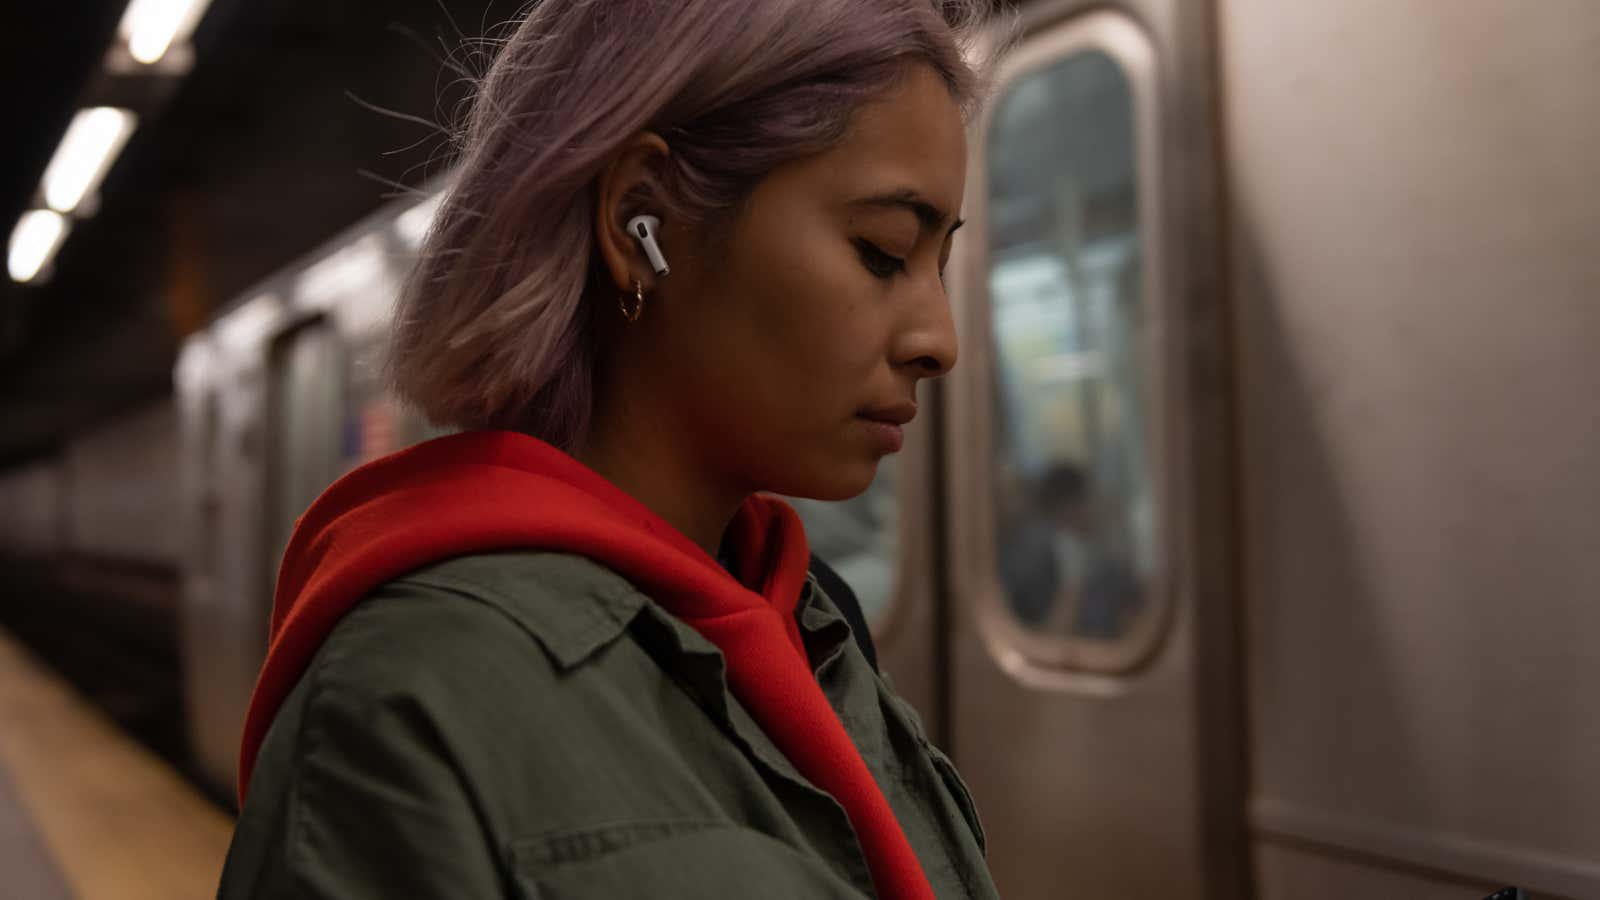 Apple unveils the AirPods for “serious” music listeners